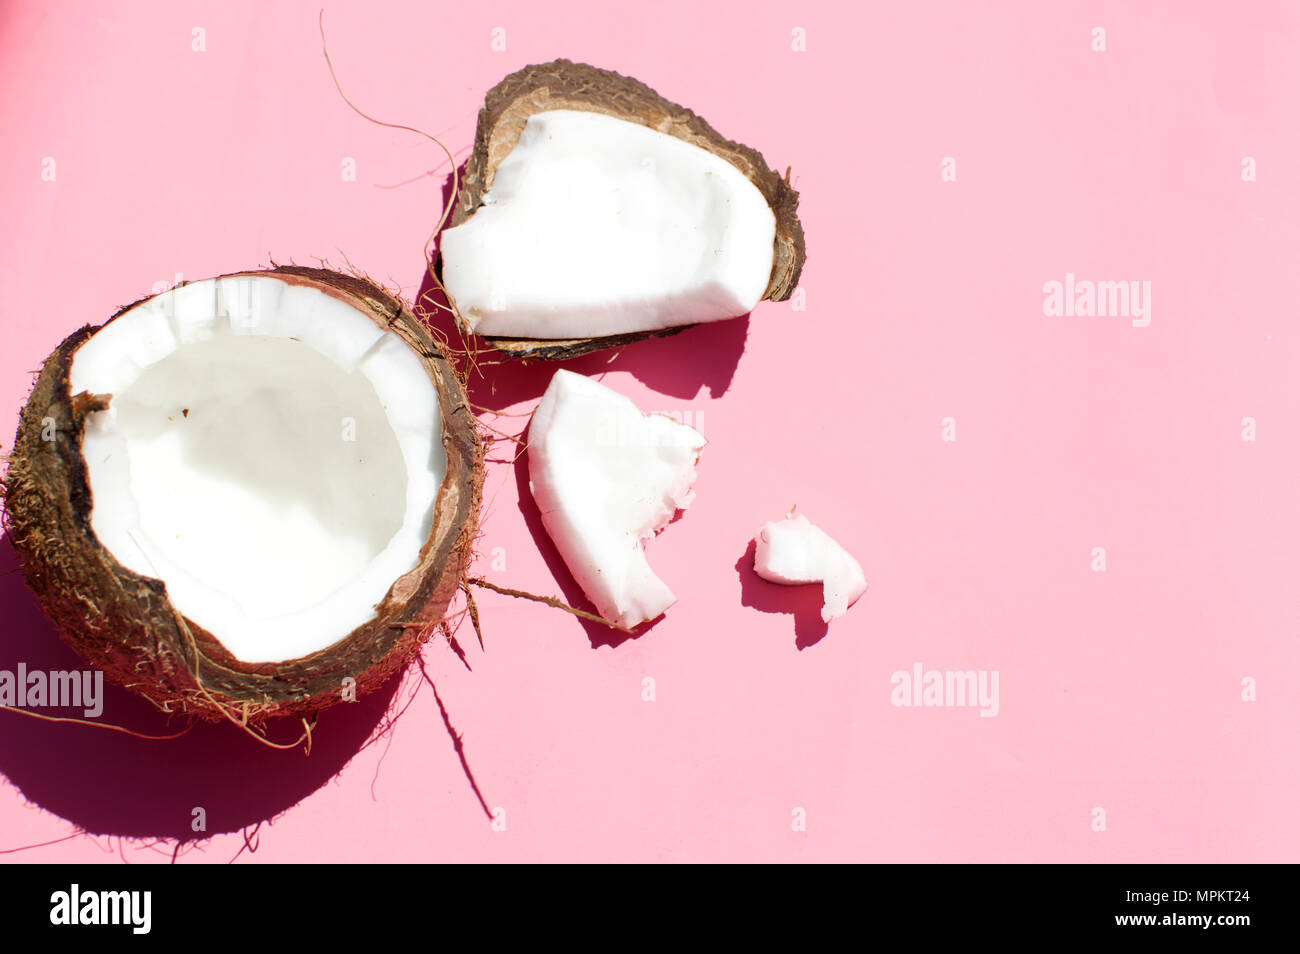 coconut on pink background Stock Photo